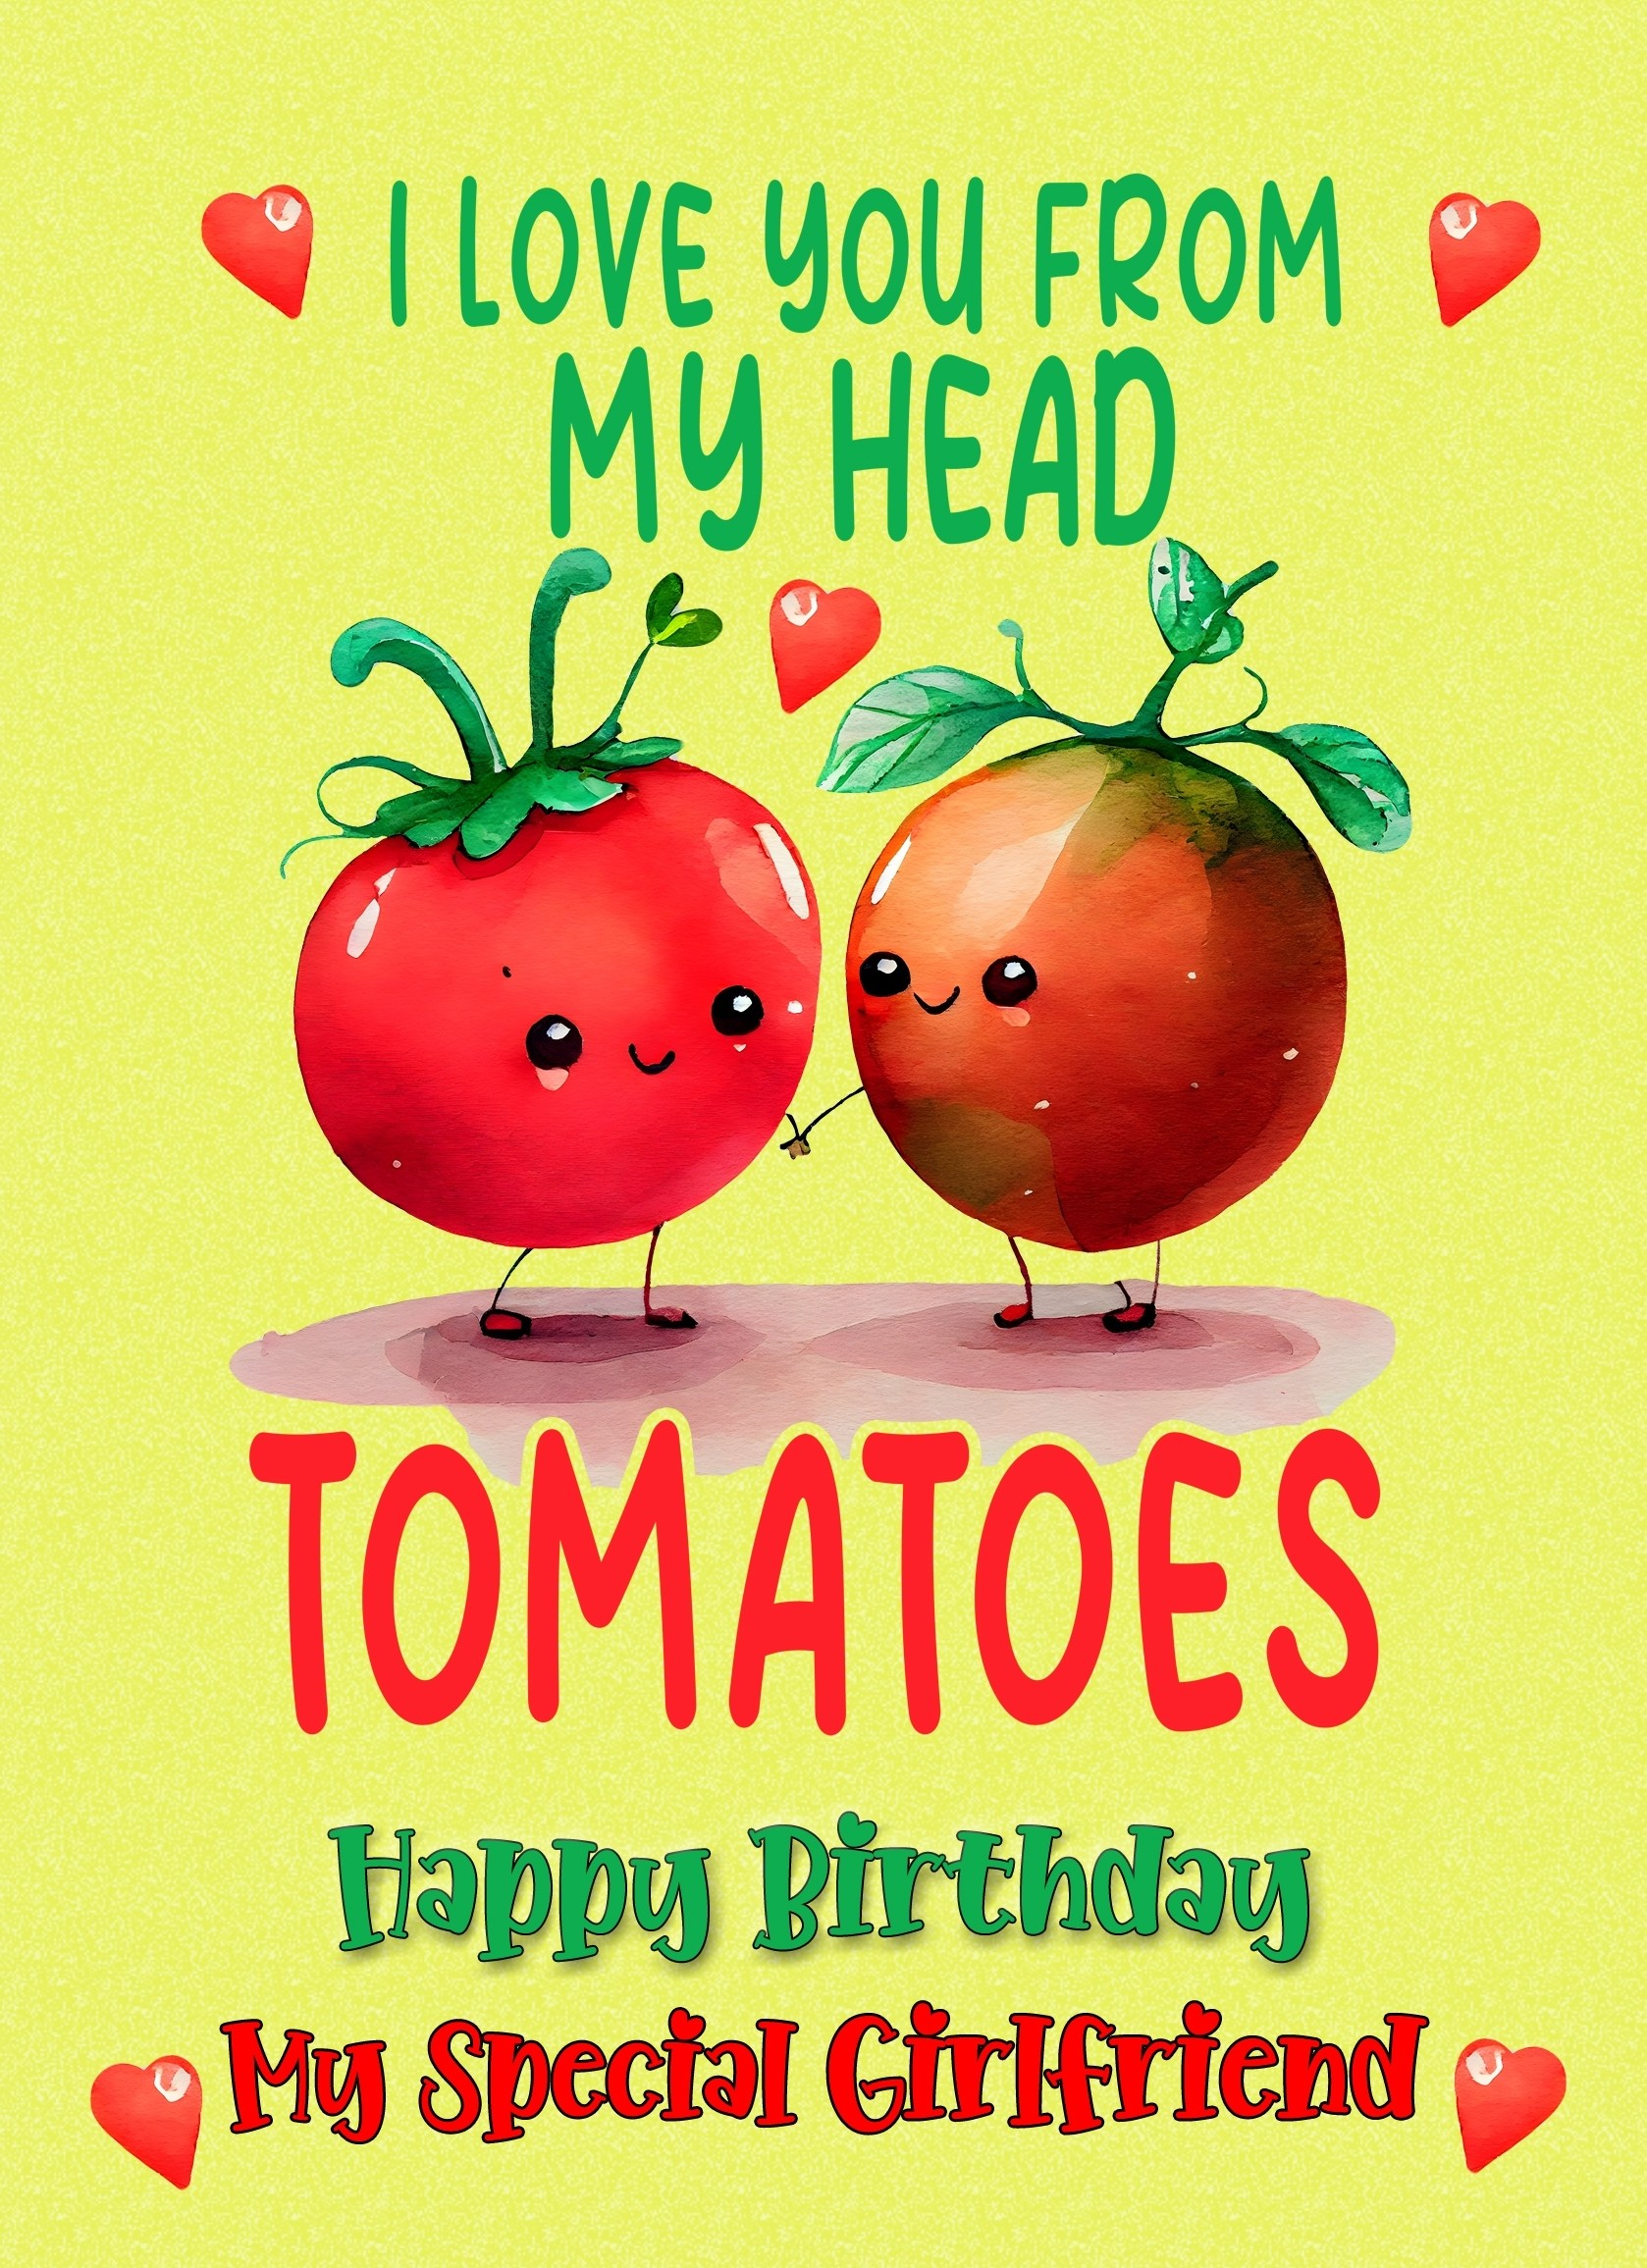 Funny Pun Romantic Birthday Card for Girlfriend (Tomatoes)